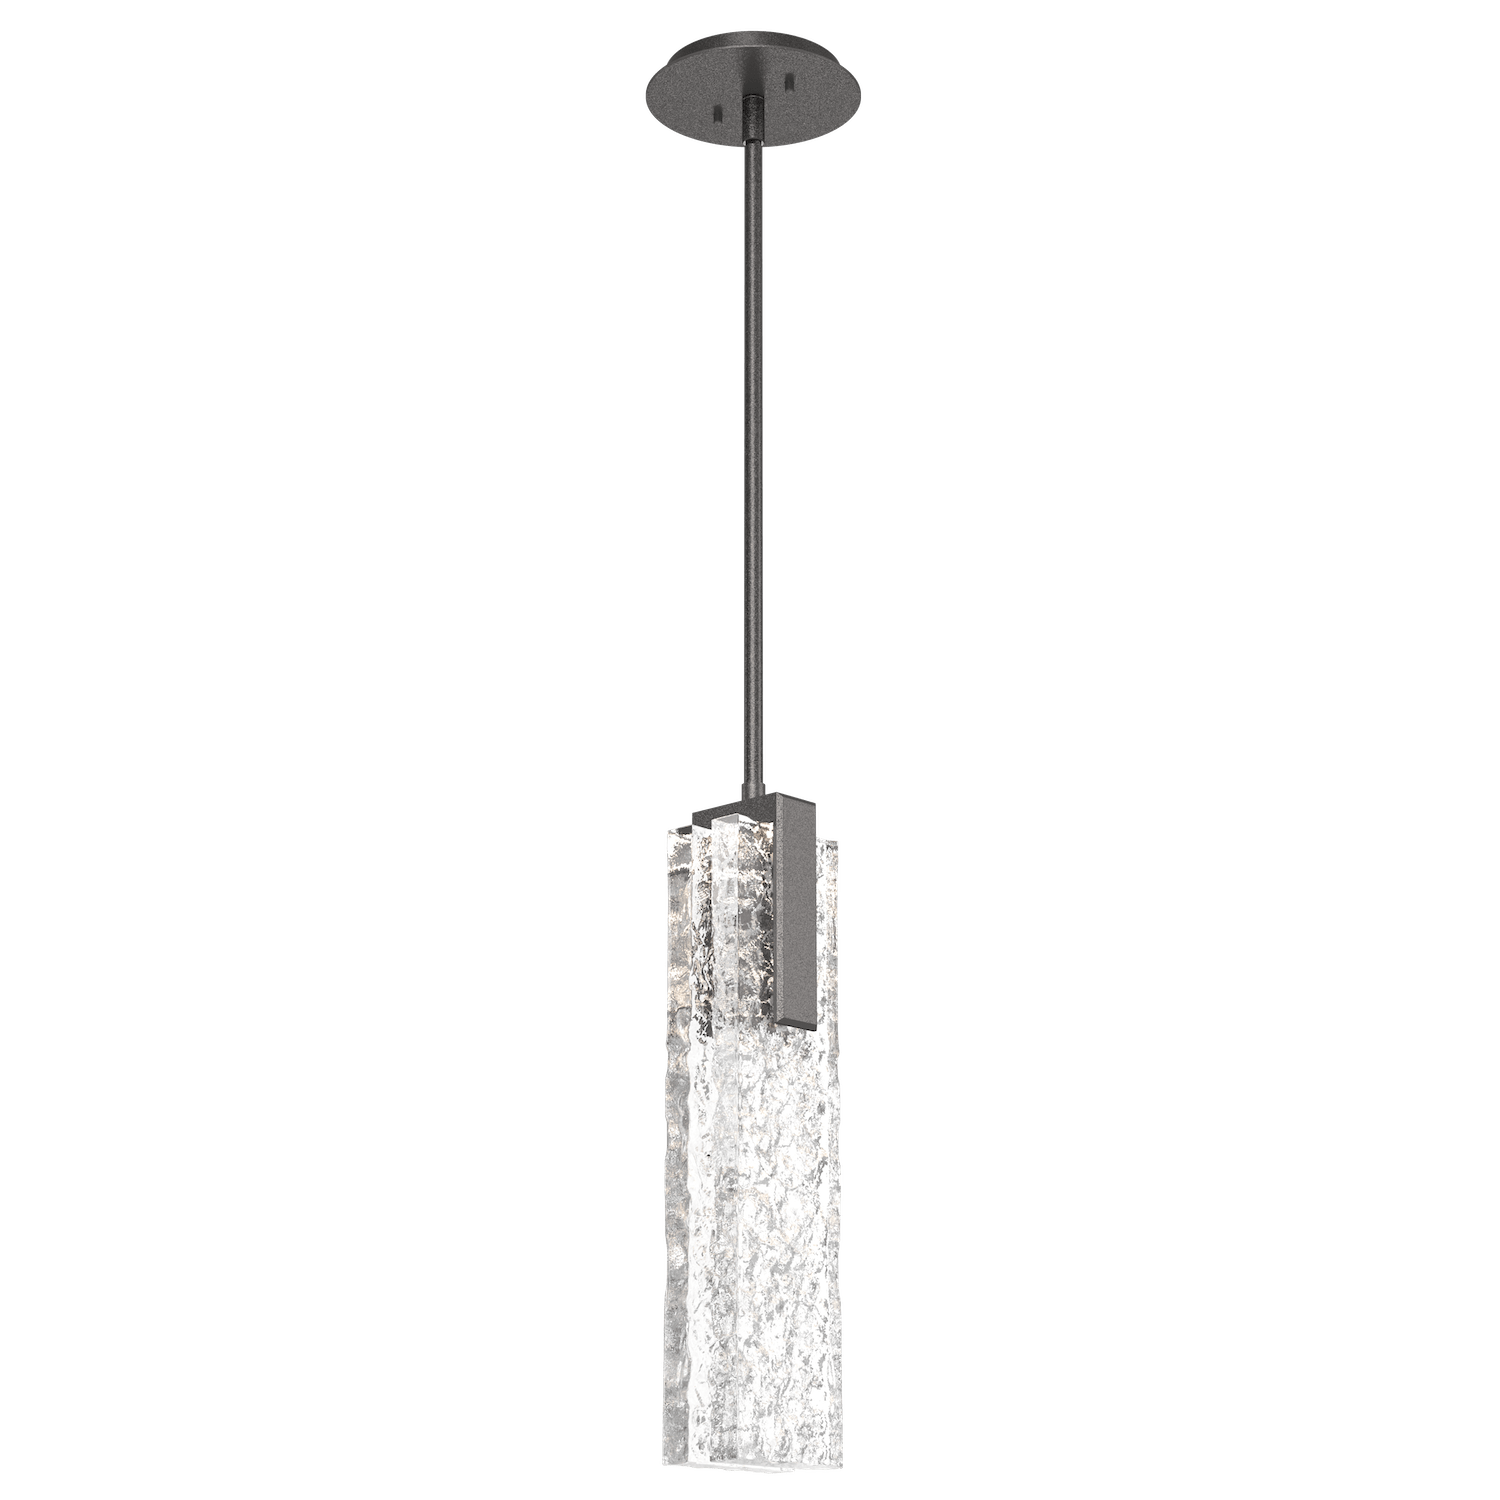 LAB0061-17-GP-GC-Hammerton-Studio-Glacier-pendant-light-with-graphite-finish-and-clear-blown-glass-with-geo-clear-cast-glass-diffusers-and-LED-lamping